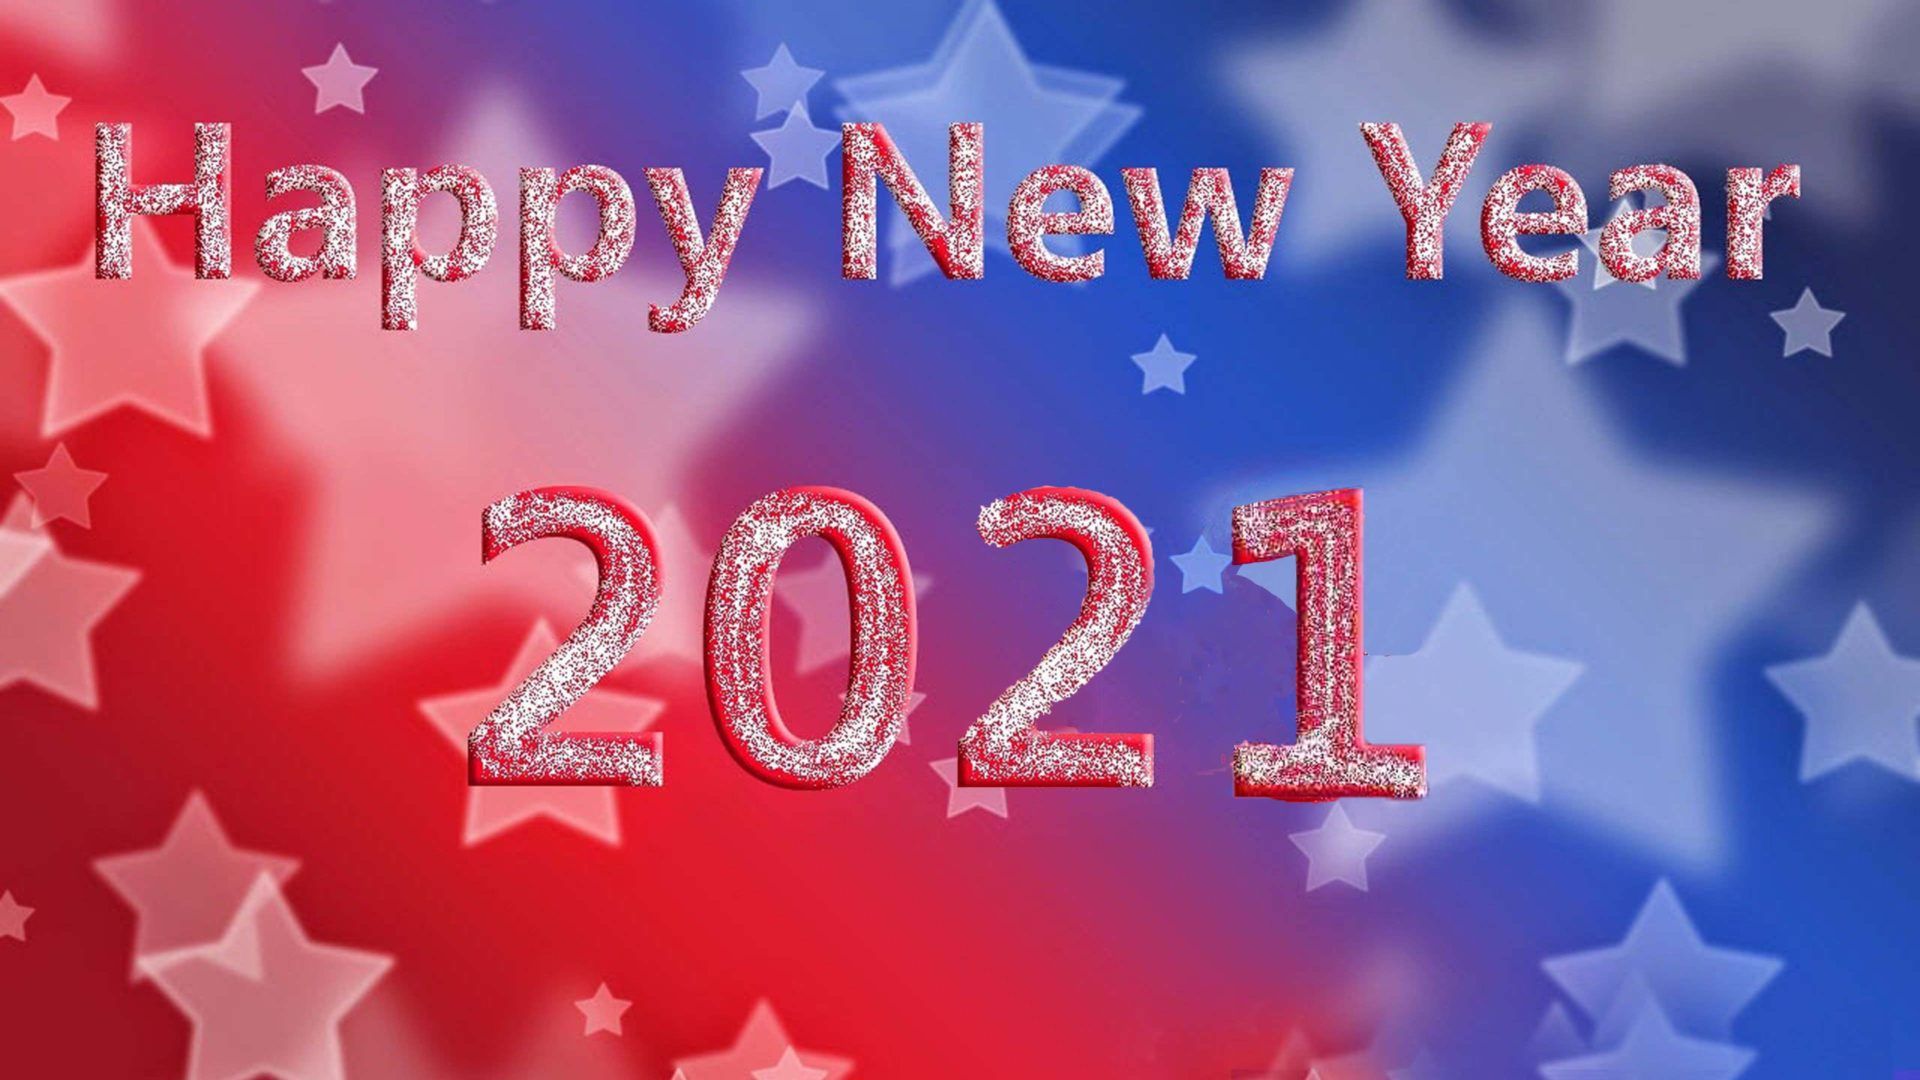 Happy New Year 2021 Greeting Card For Android Mobile Phones Hd Wallpapers % : Wallpapers13